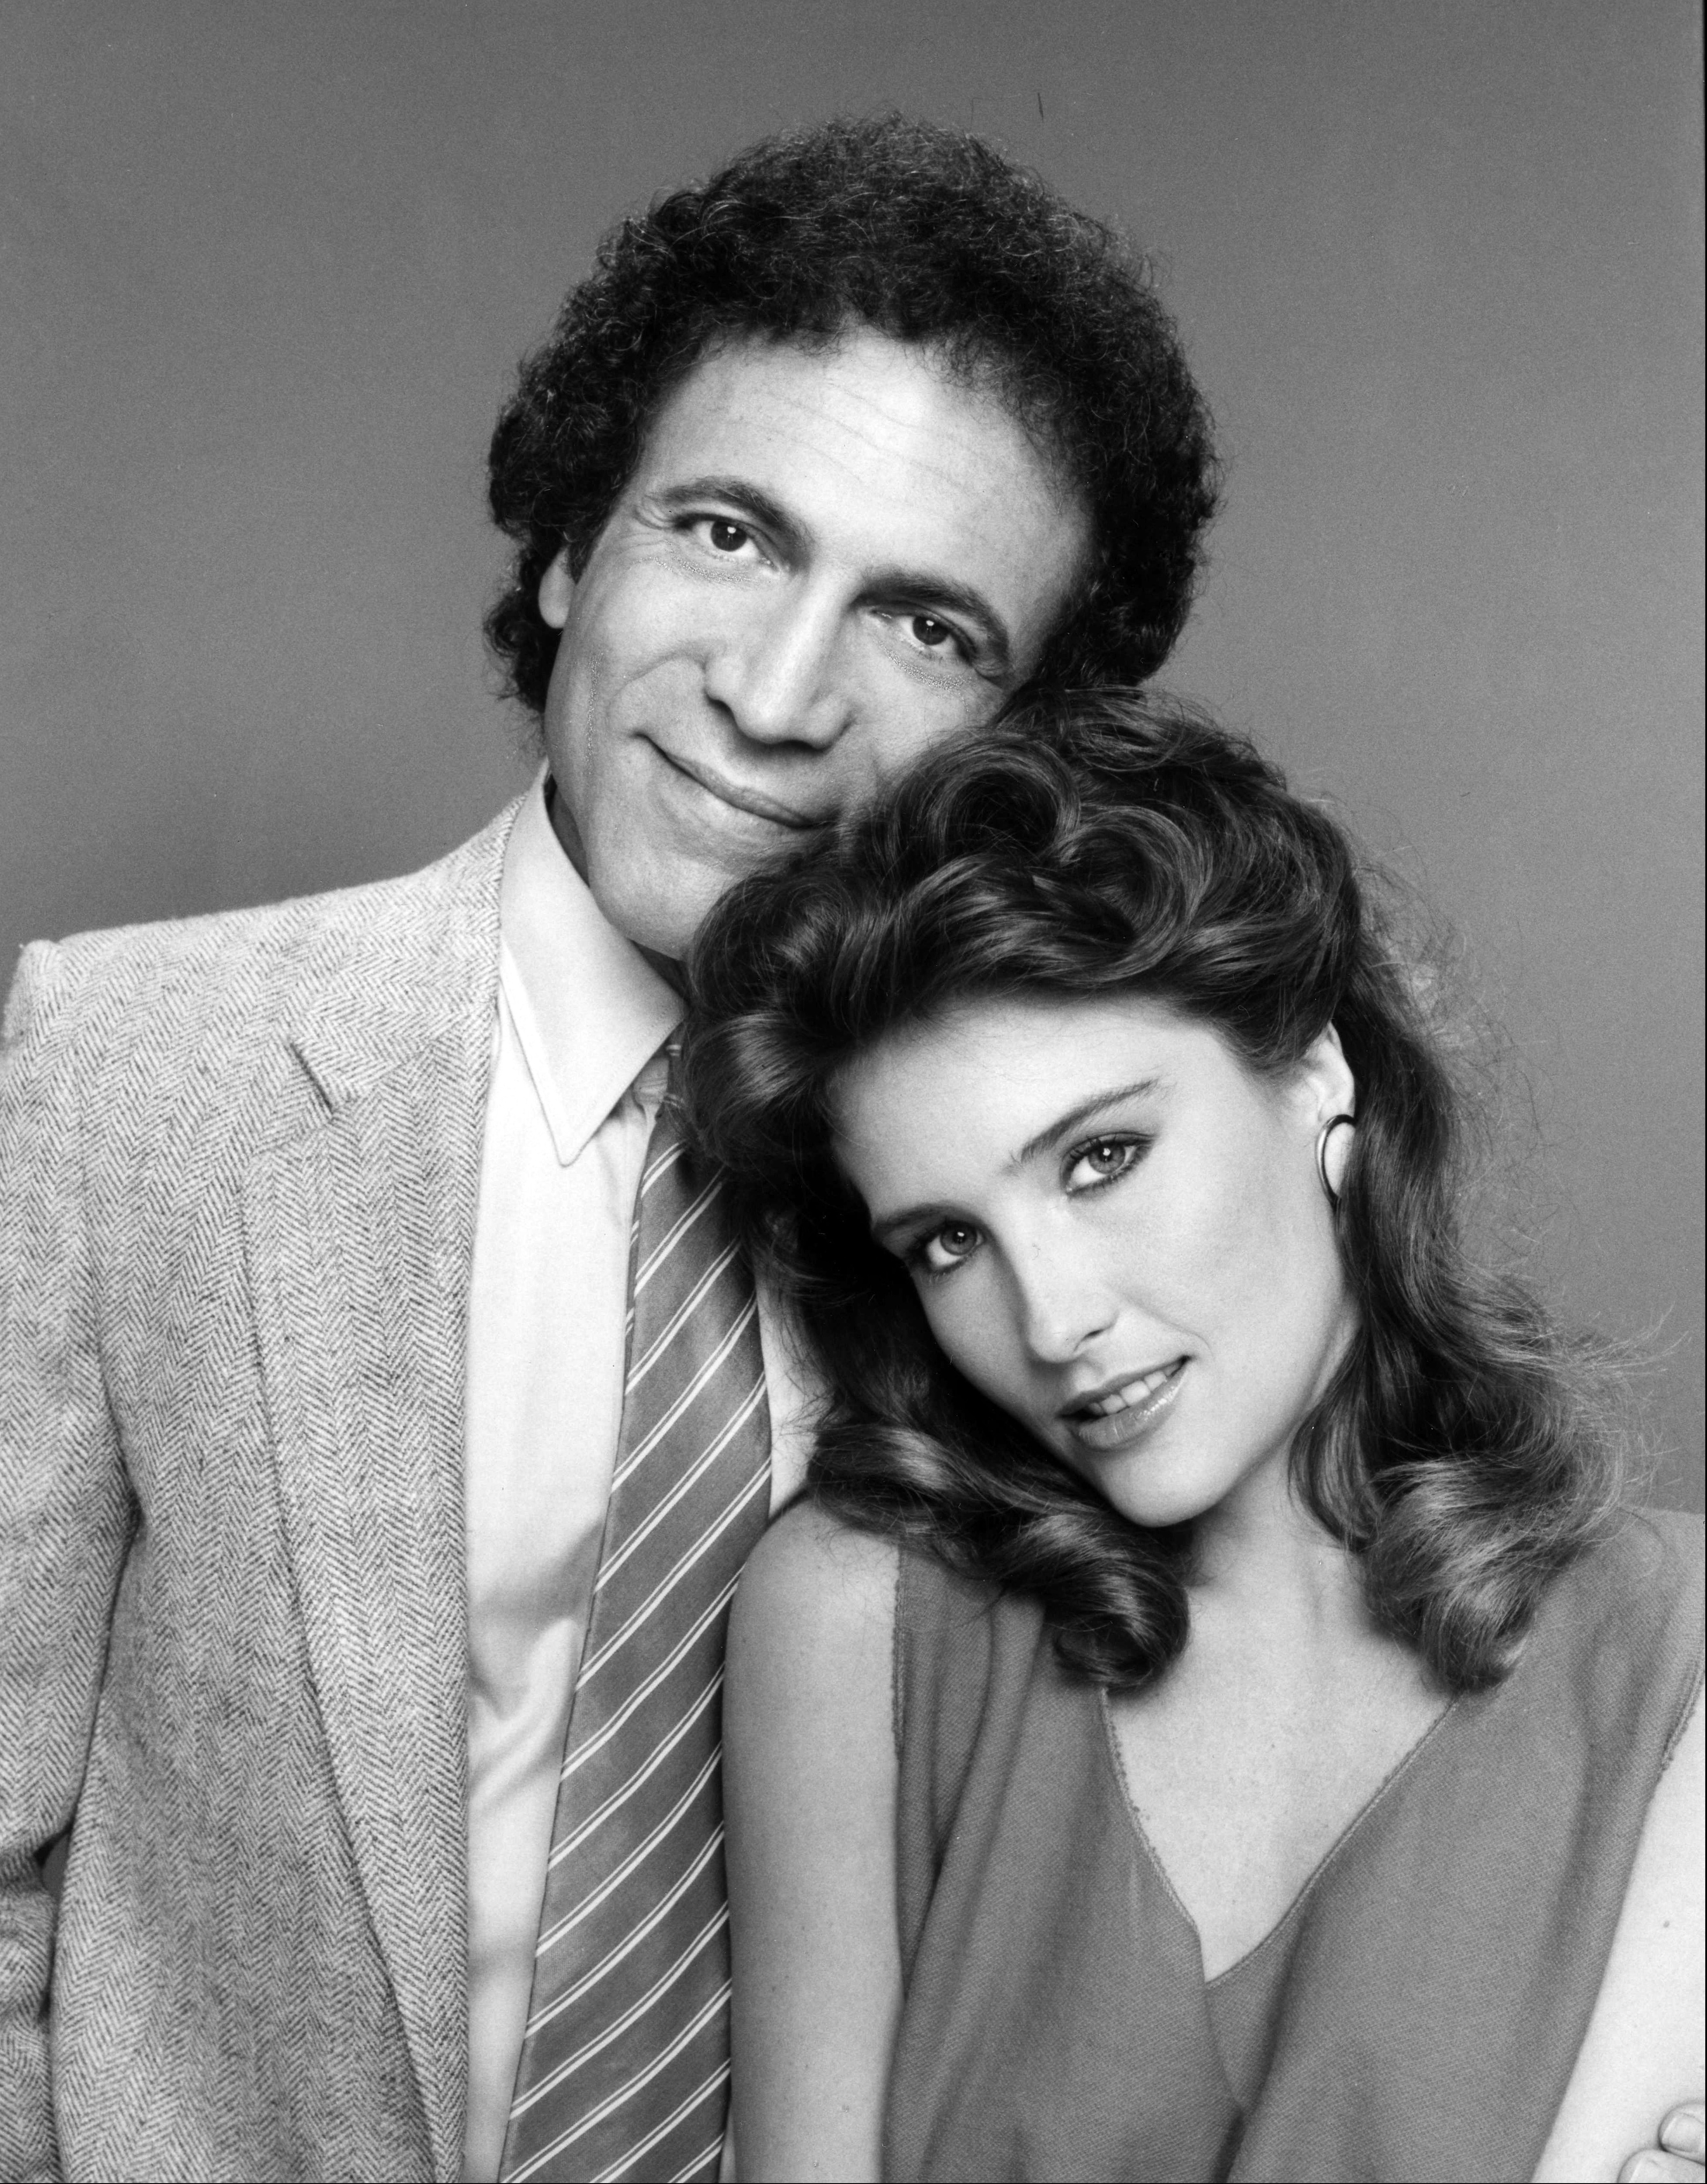 Robyn Bernard and David Groh on September 5, 1984 | Source: Getty Images